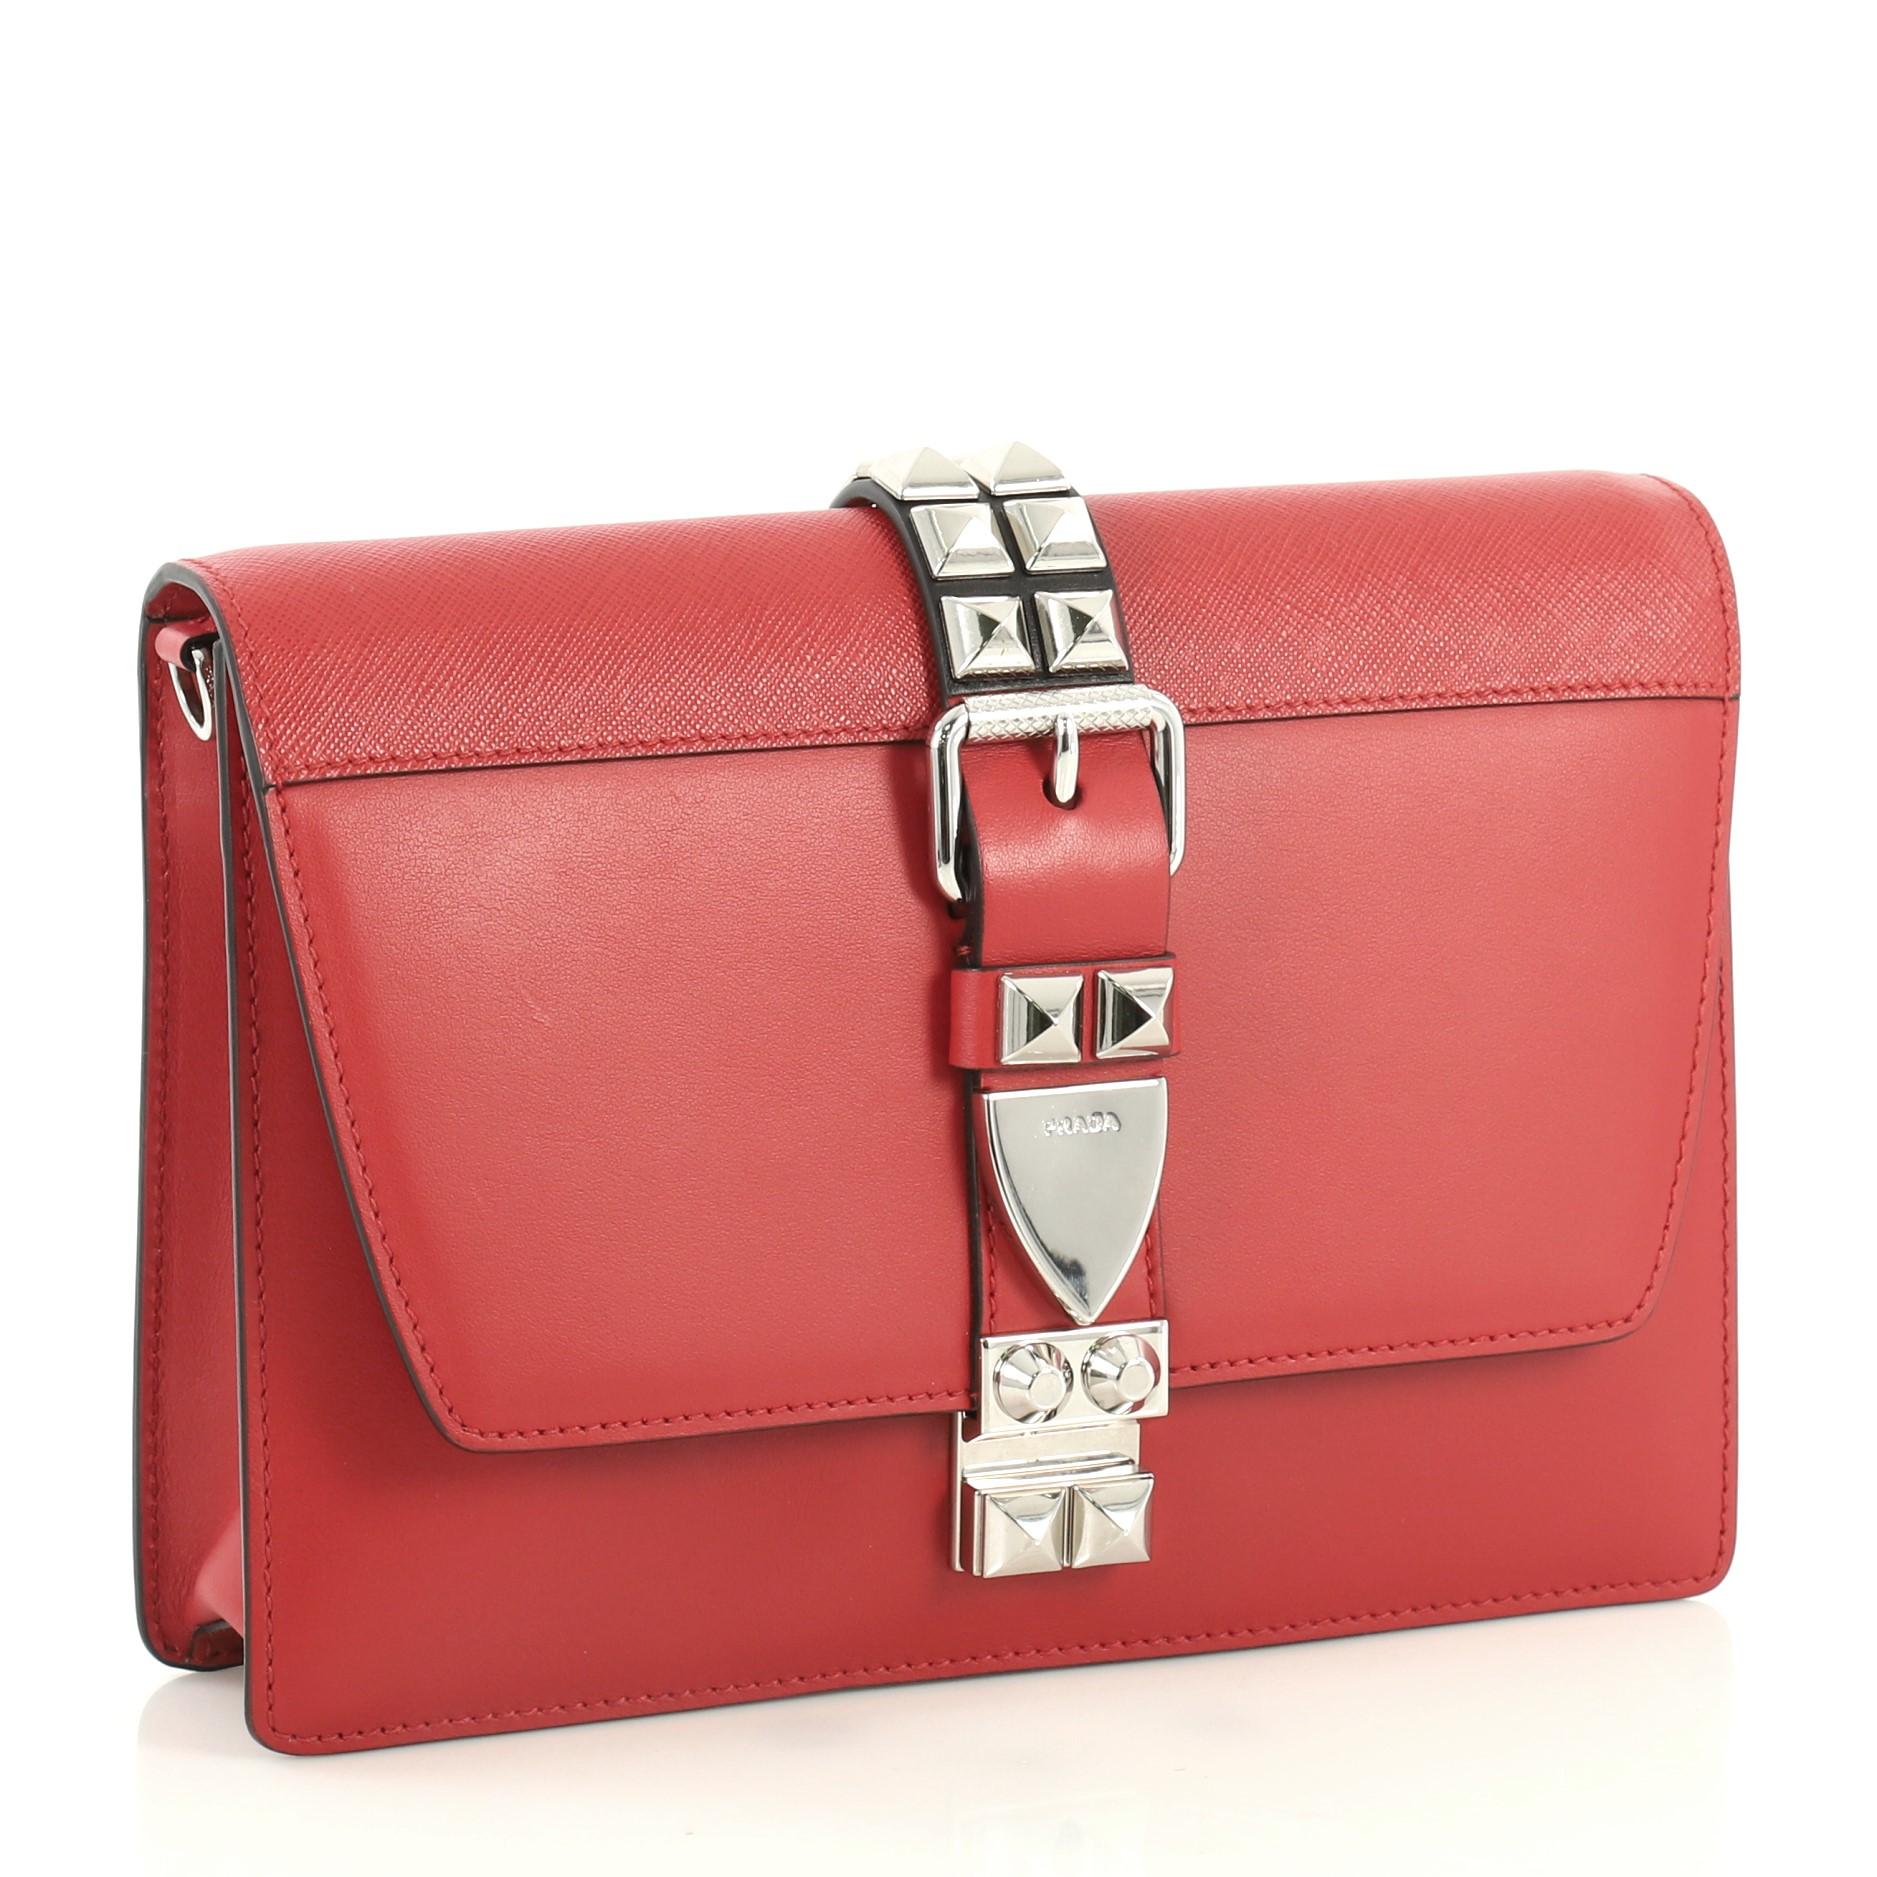 This Prada Elektra Shoulder Bag Studded Leather Small, crafted in red studded leather, features leather shoulder strap, studded front buckle and silver-tone hardware. Its snap-lock closure opens to a red leather and black fabric interior with zip